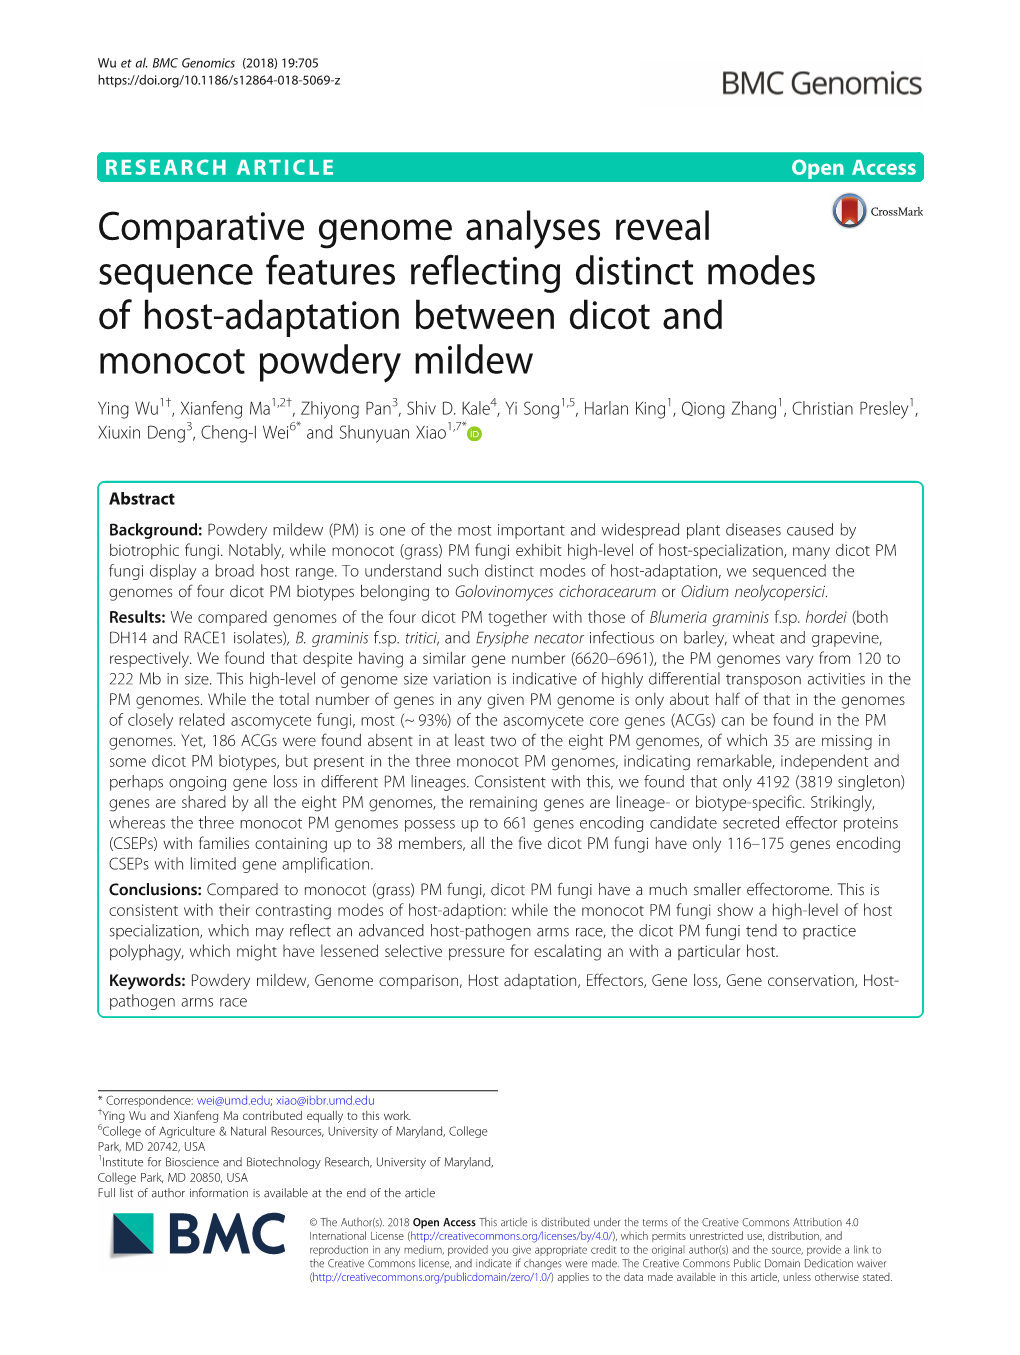 Comparative Genome Analyses Reveal Sequence Features Reflecting